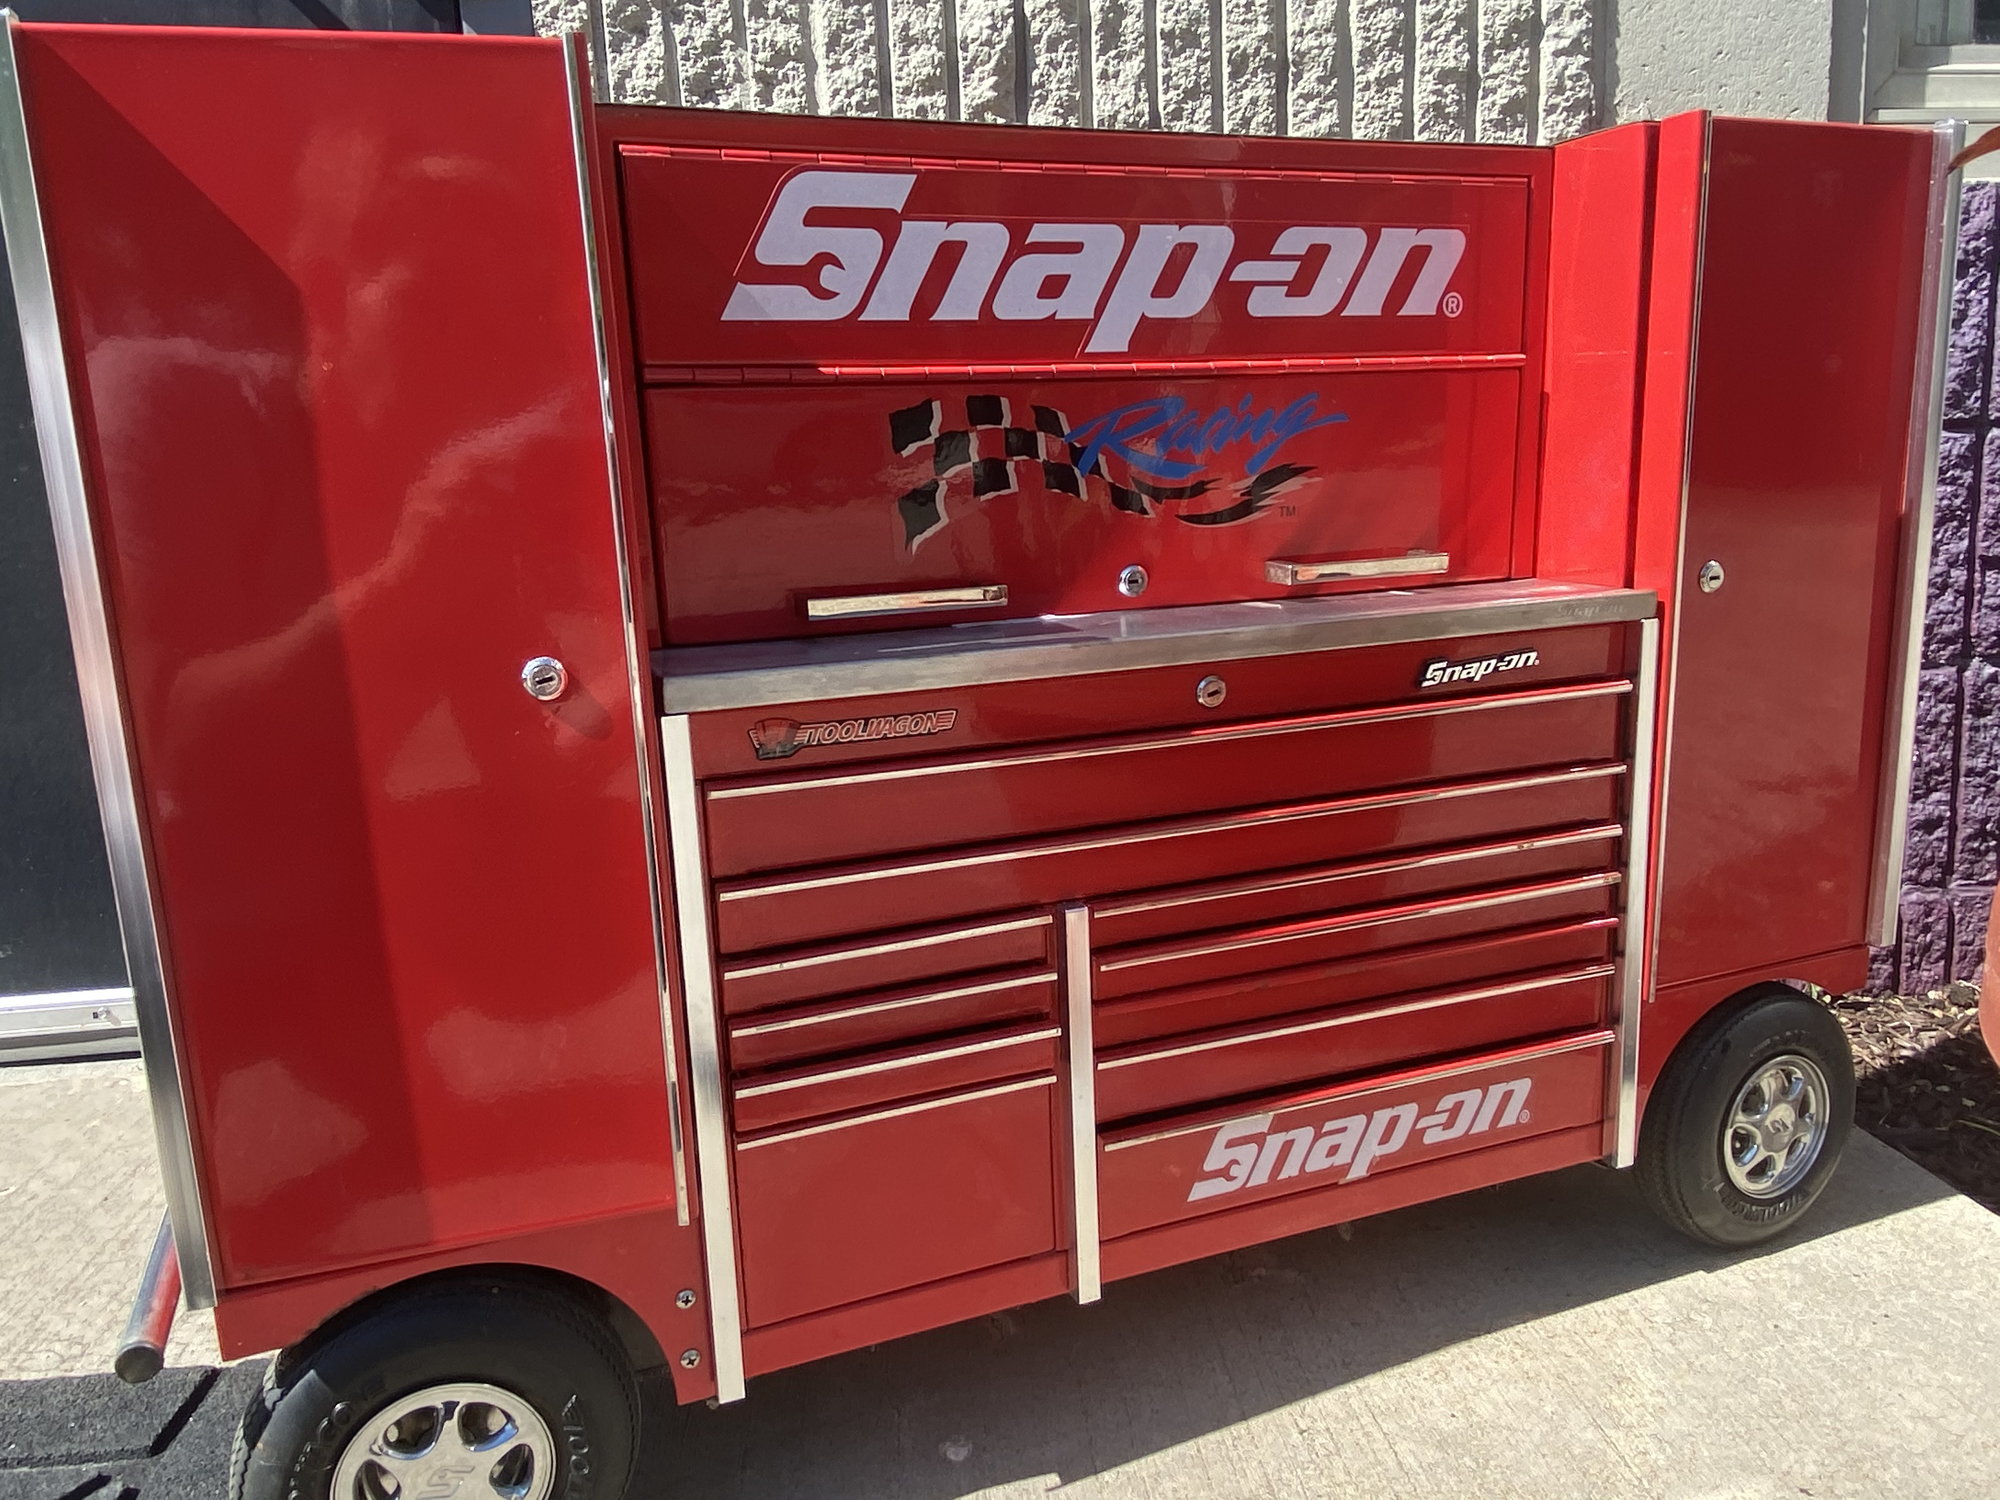 Miscellaneous - Snap On Pit Box Tool box Miniature - New - All Years Any Make All Models - Lannon, WI 53046, United States